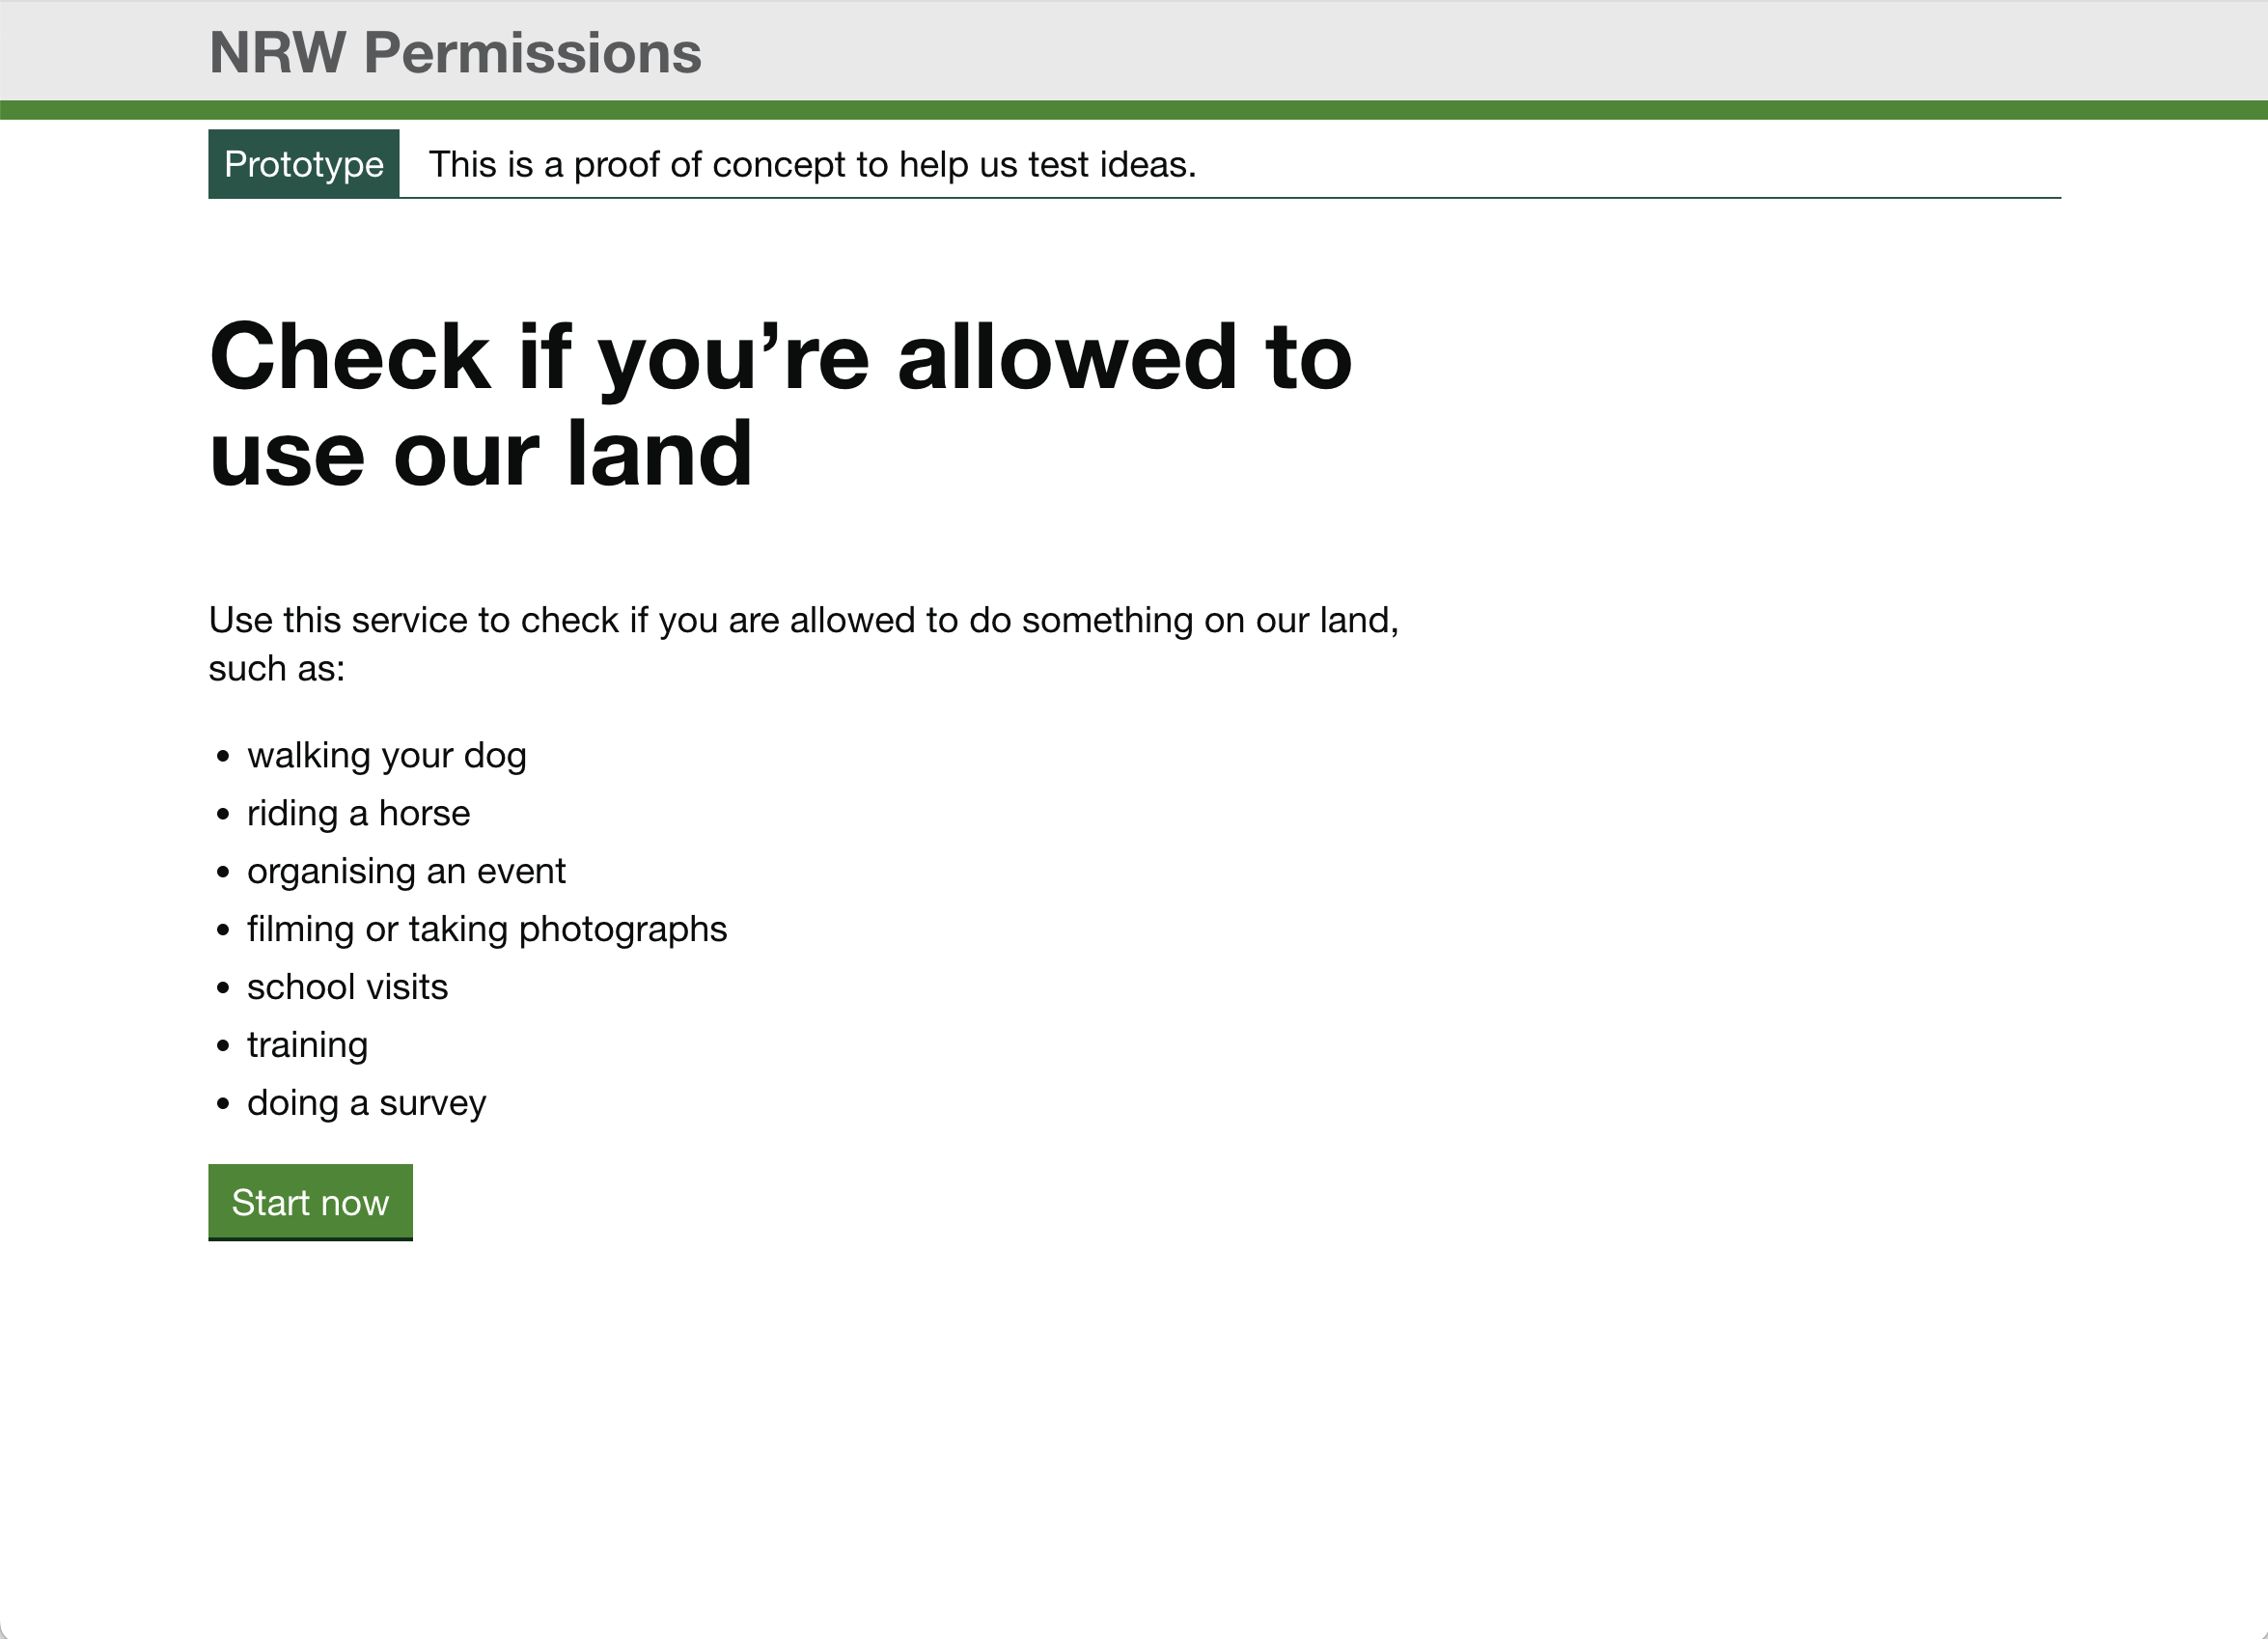 Check if you're allowed to use our land page